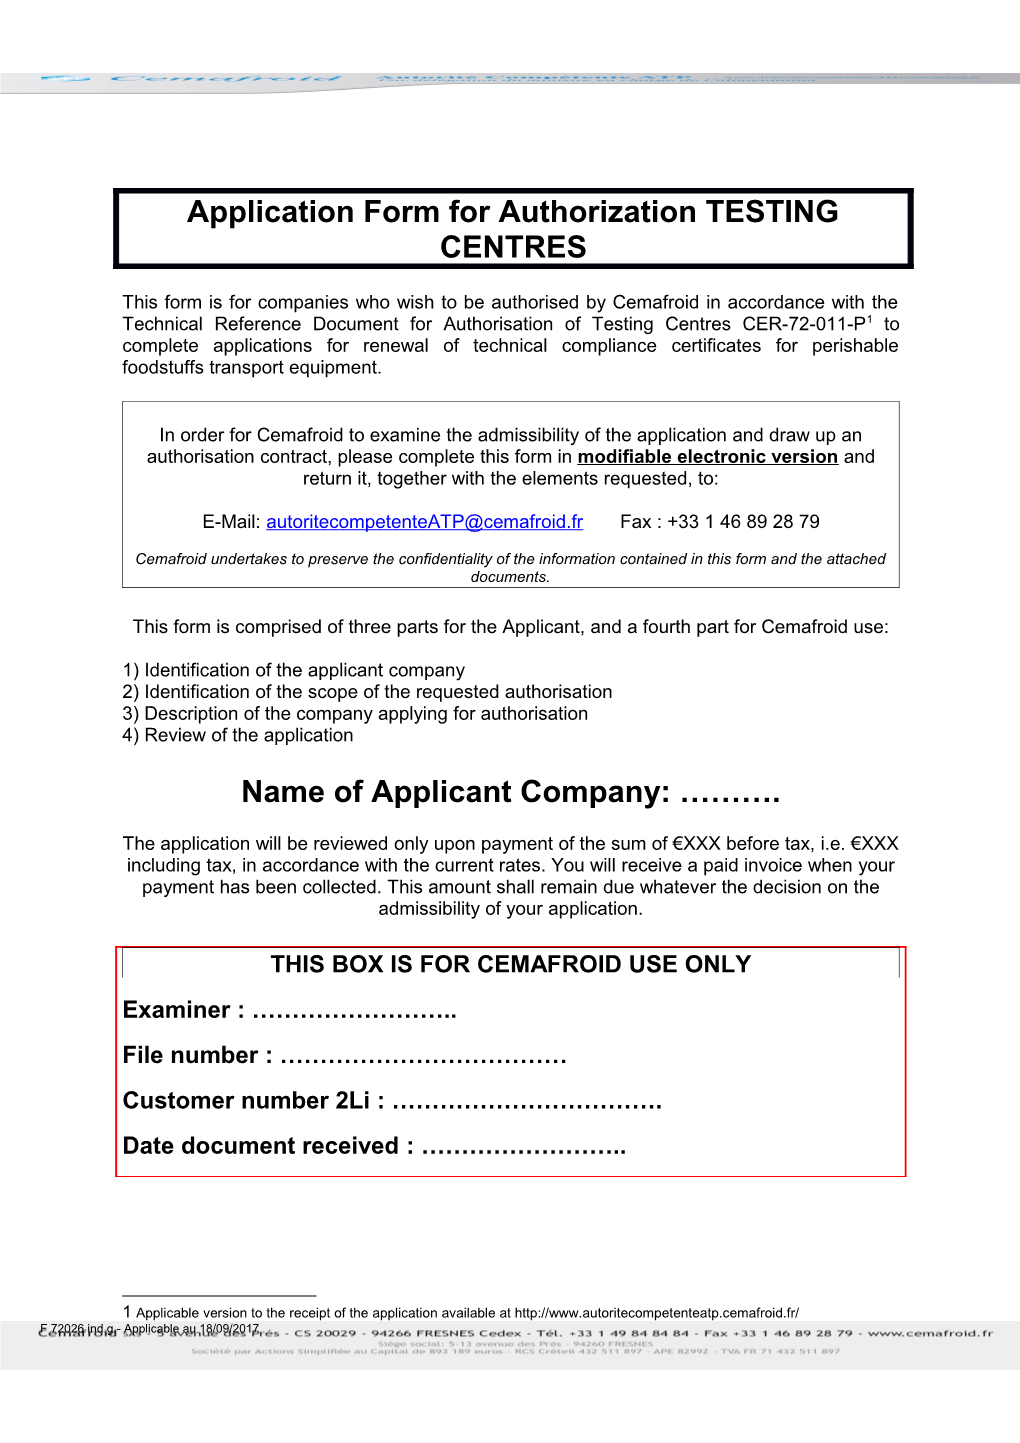 Application Form for Authorization TESTING CENTRES